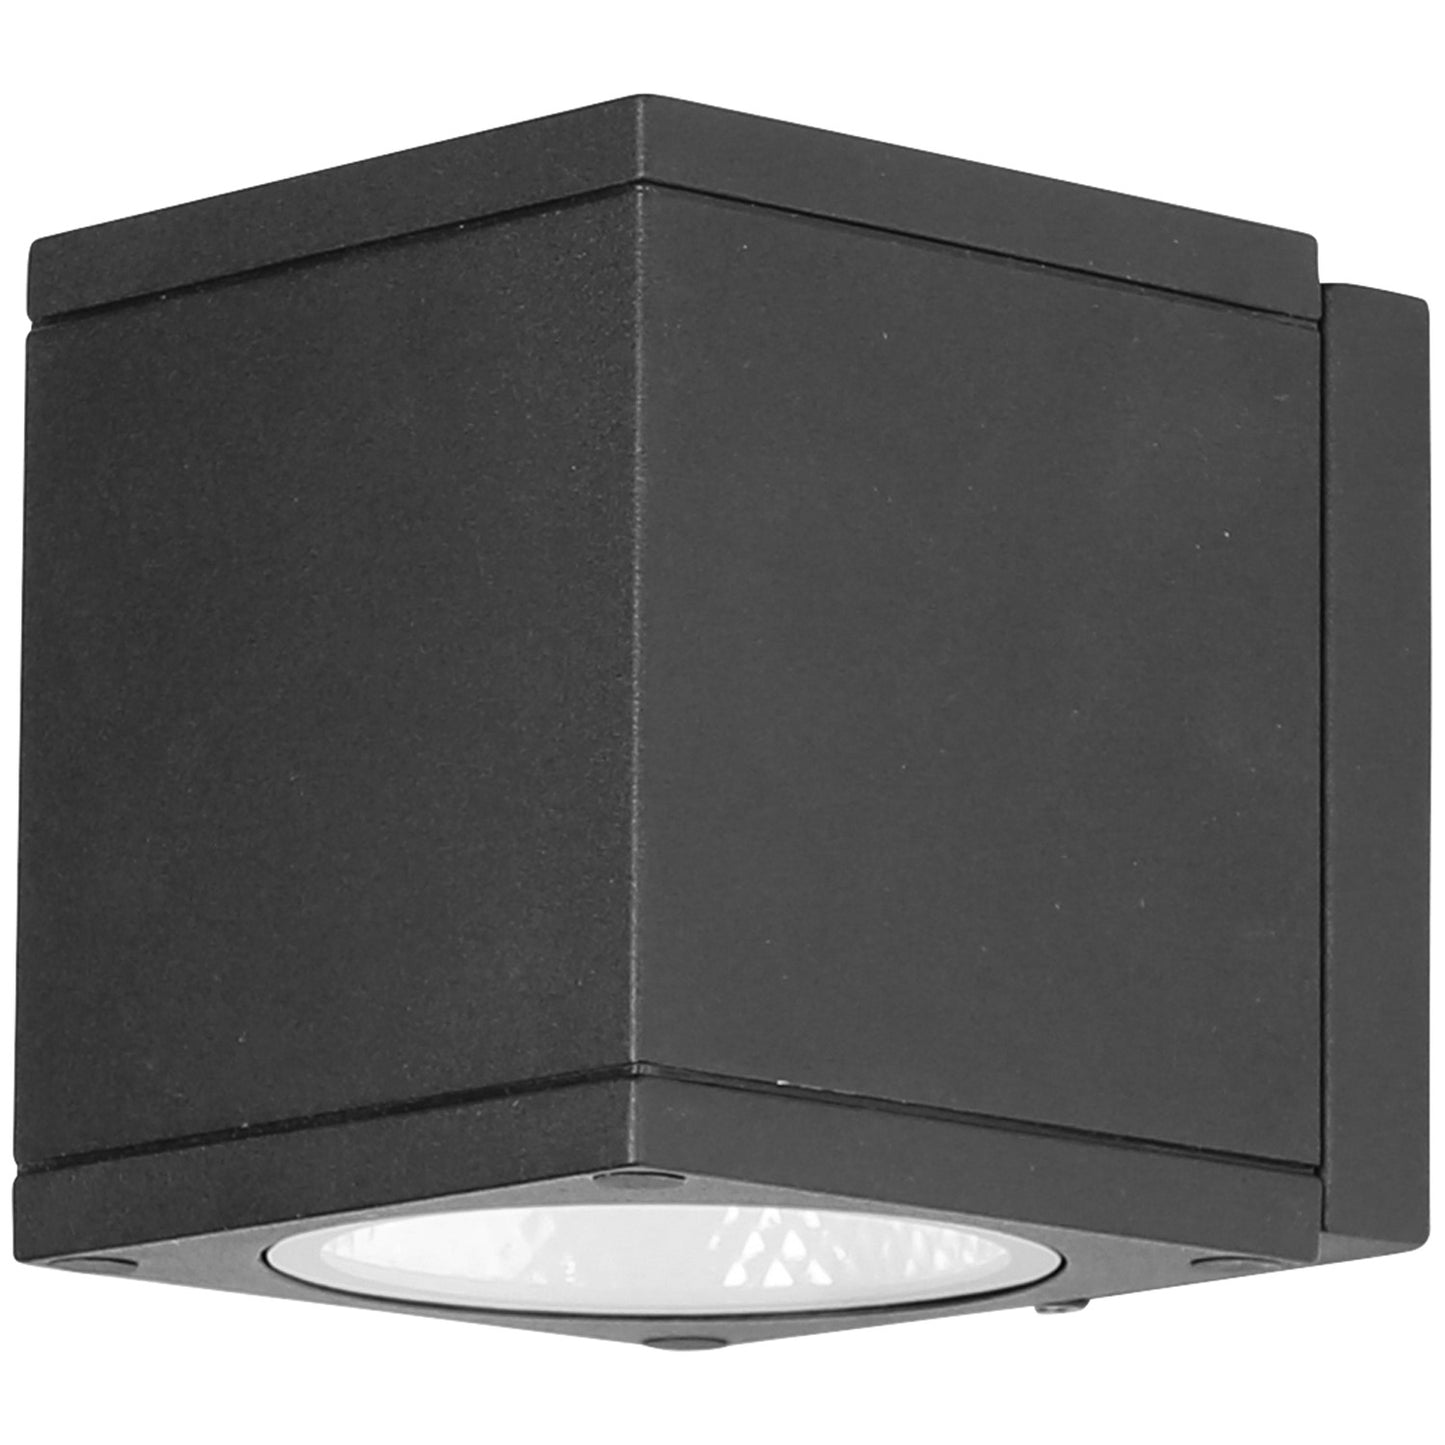 Sunlite 81292 LED Cube Up And Down Outdoor Fixture, 18 Watts, 1300 Lumens, 30k/40k/50k Color Tunable, 80 CRI, ETL Listed, Black, For Residential &amp; Commercial Use